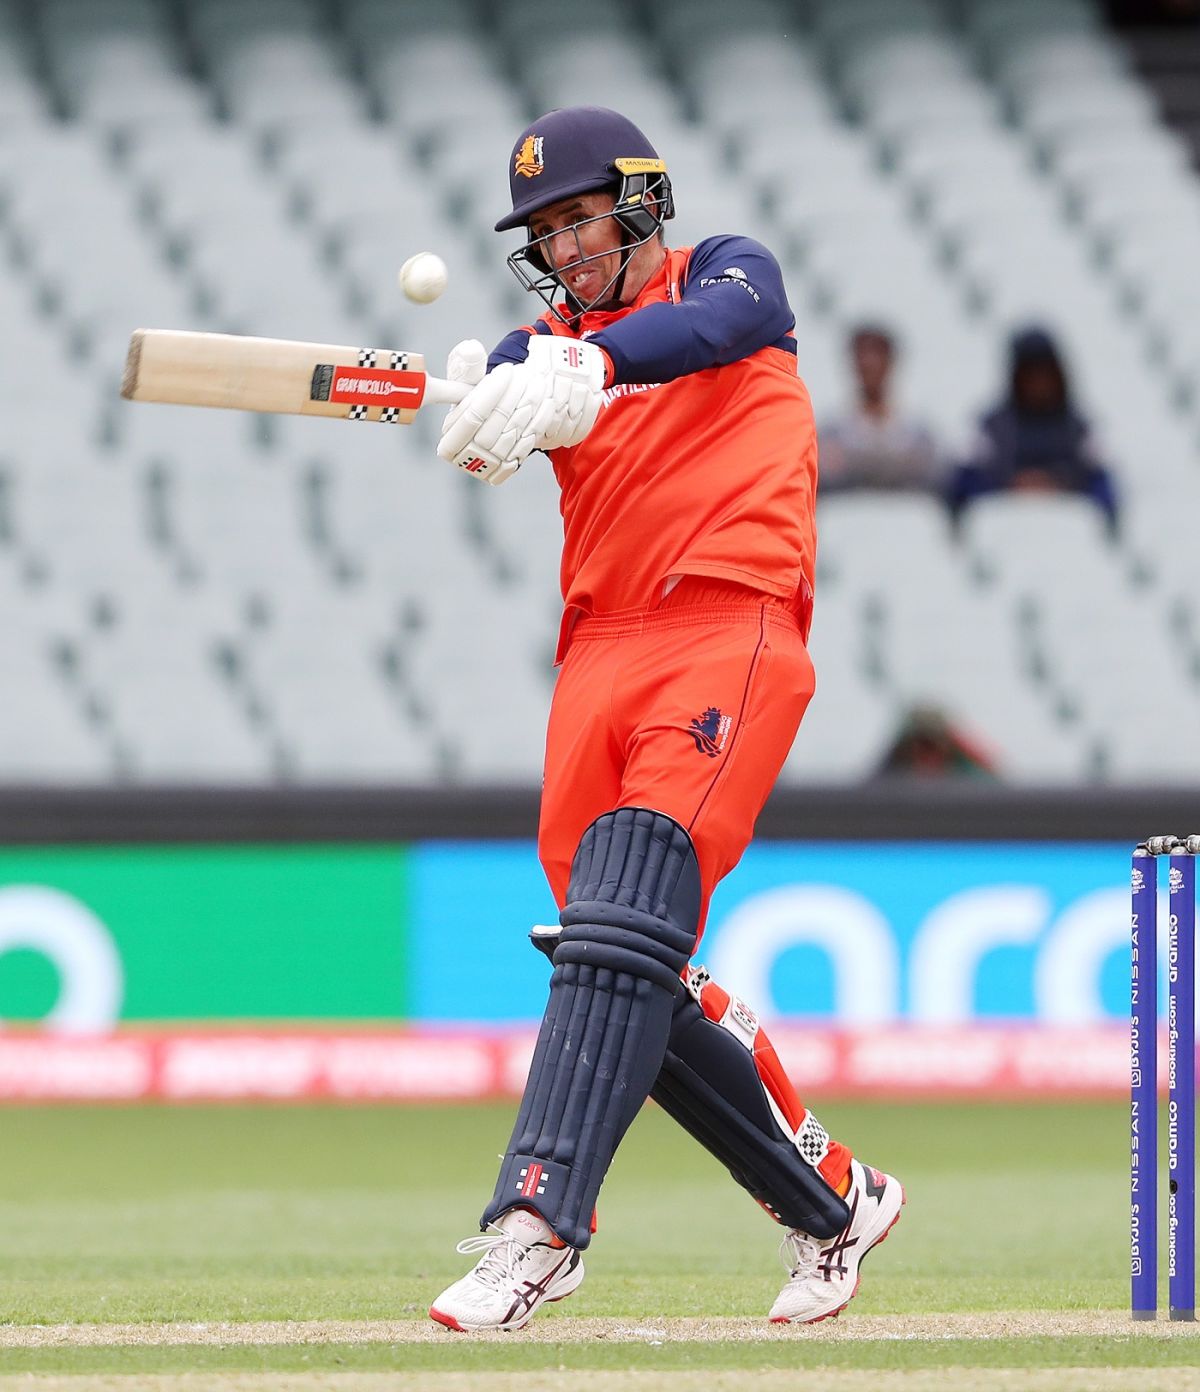 Tom Cooper got his highest score of the 2022 T20 World Cup against Zimbabwe, Netherlands vs Zimbabwe, Men's T20 World Cup 2022, Group 2, Adelaide, November 2, 2022